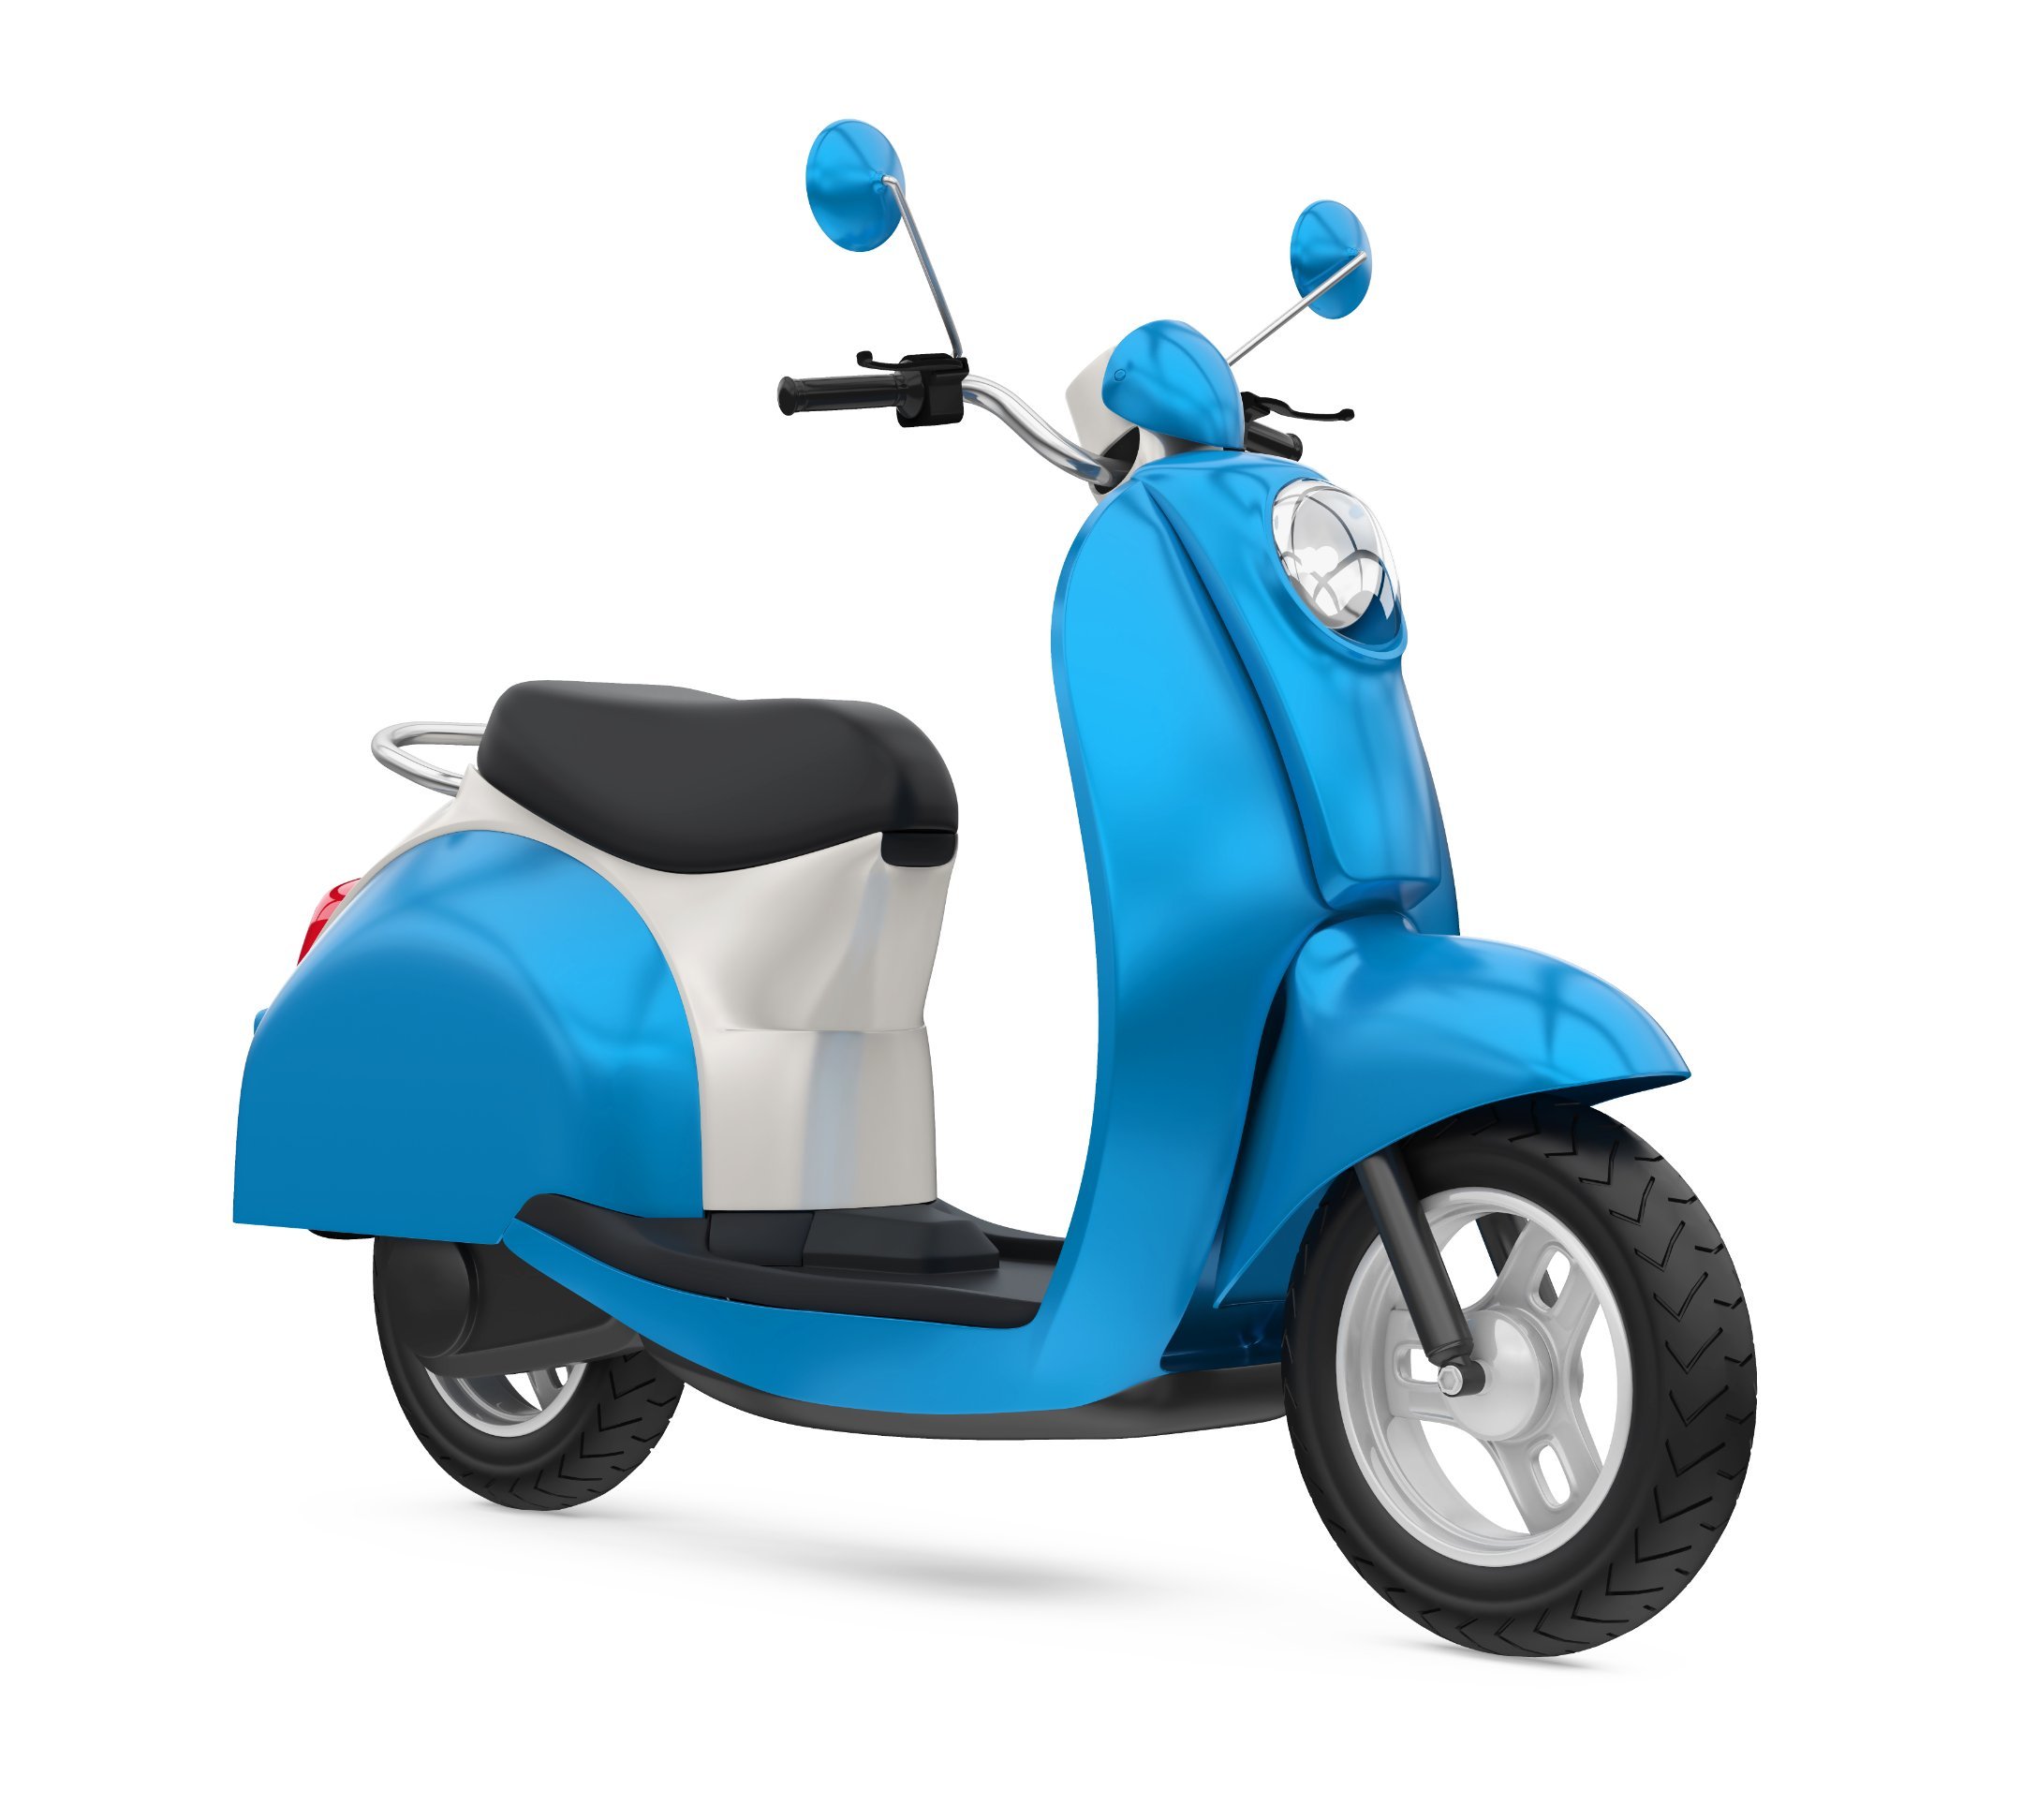 Sasken Wins Exciting Electric Vehicle Project with a Leading 2-wheeler EV OEM